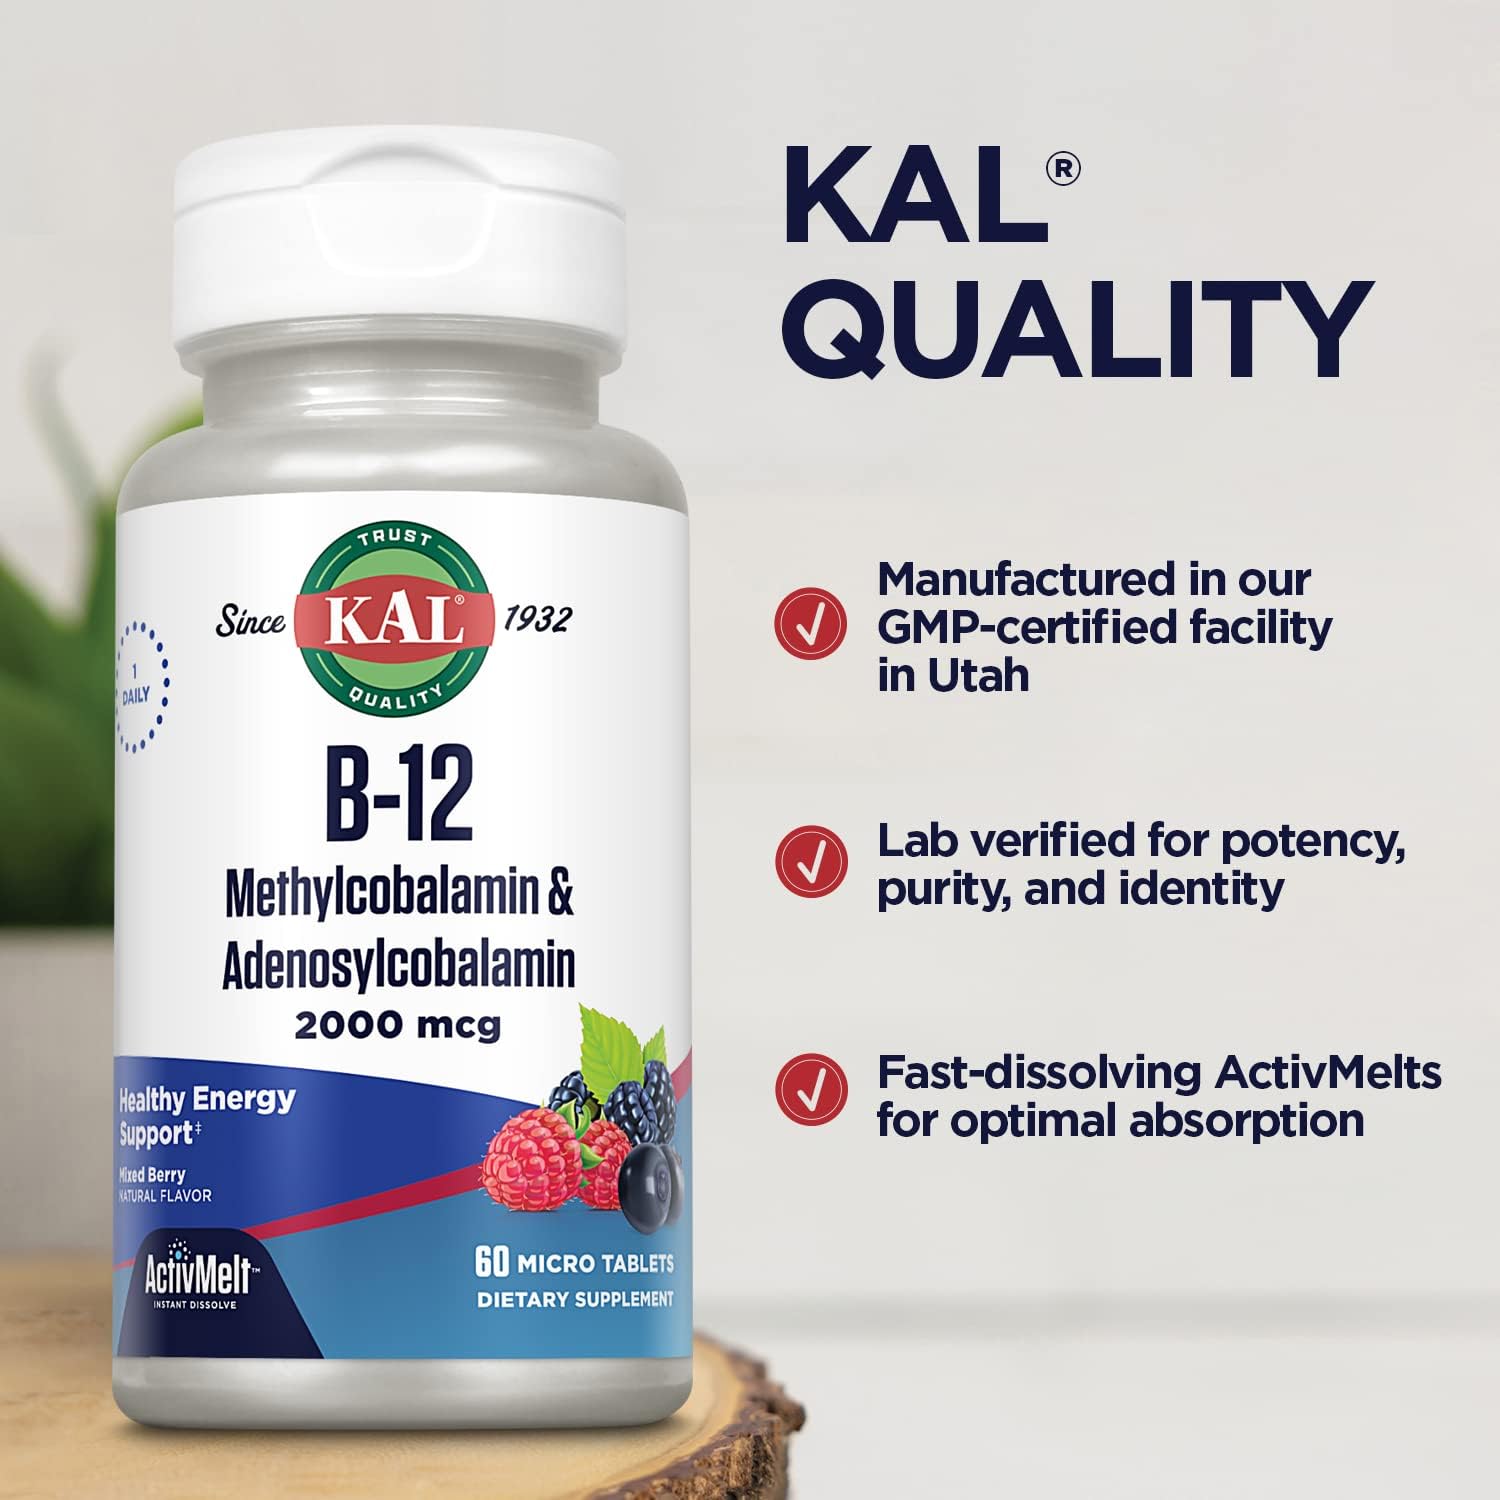 KAL Vitamin B12 Methylcobalamin and Adenosylcobalamin 2000 mcg ActivMelt, B12 Energy Supplements, Metabolism, Nerve, Red Blood Cell Support, High Absorption, Natural Berry, 60 Serv, 60 Micro Tablets : Health & Household